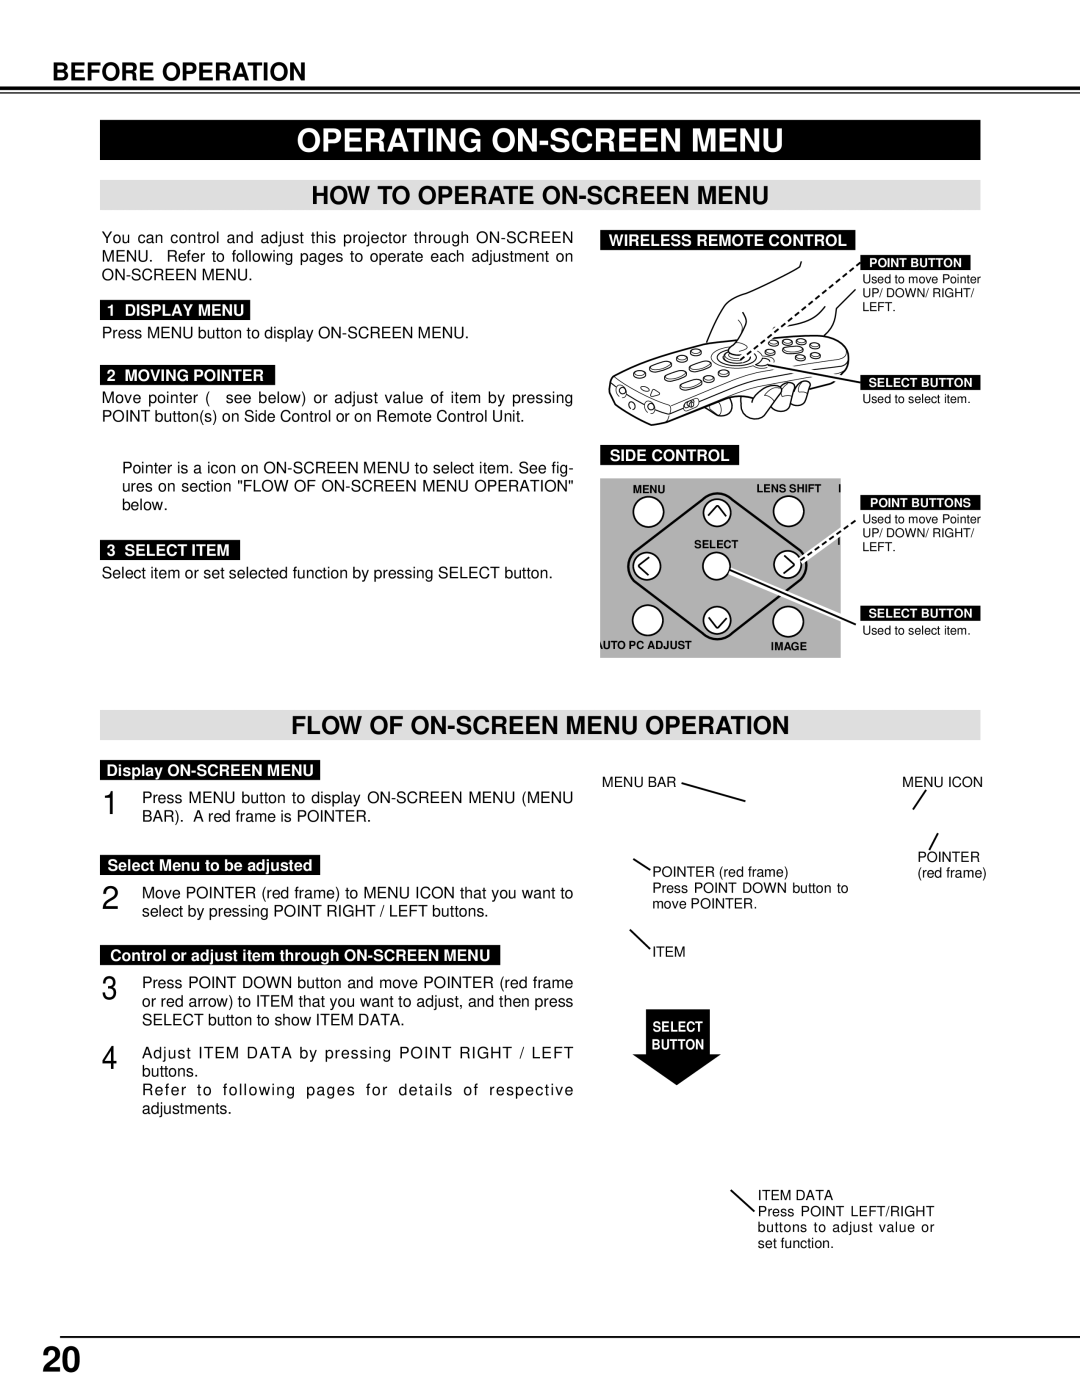 Eiki LC-XT3 instruction manual Operating ON-SCREEN Menu, HOW to Operate ON-SCREEN Menu, Flow of ON-SCREEN Menu Operation 